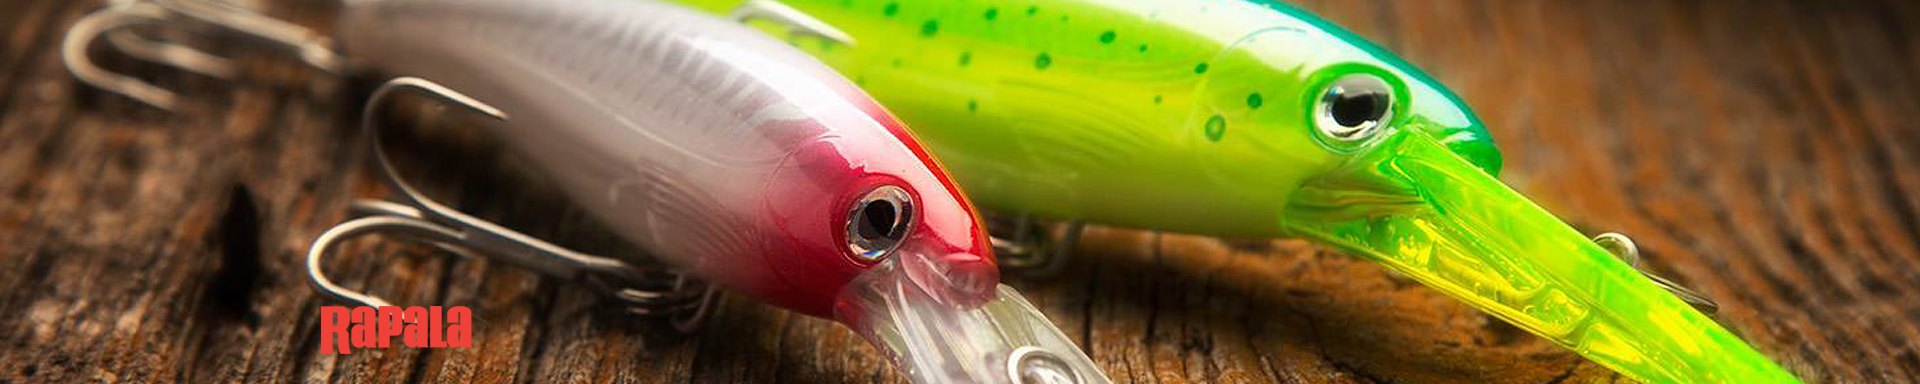 Rapala™  Fishing Lures, Pliers, Scales, Knives, Tools, Equipment, Gear 